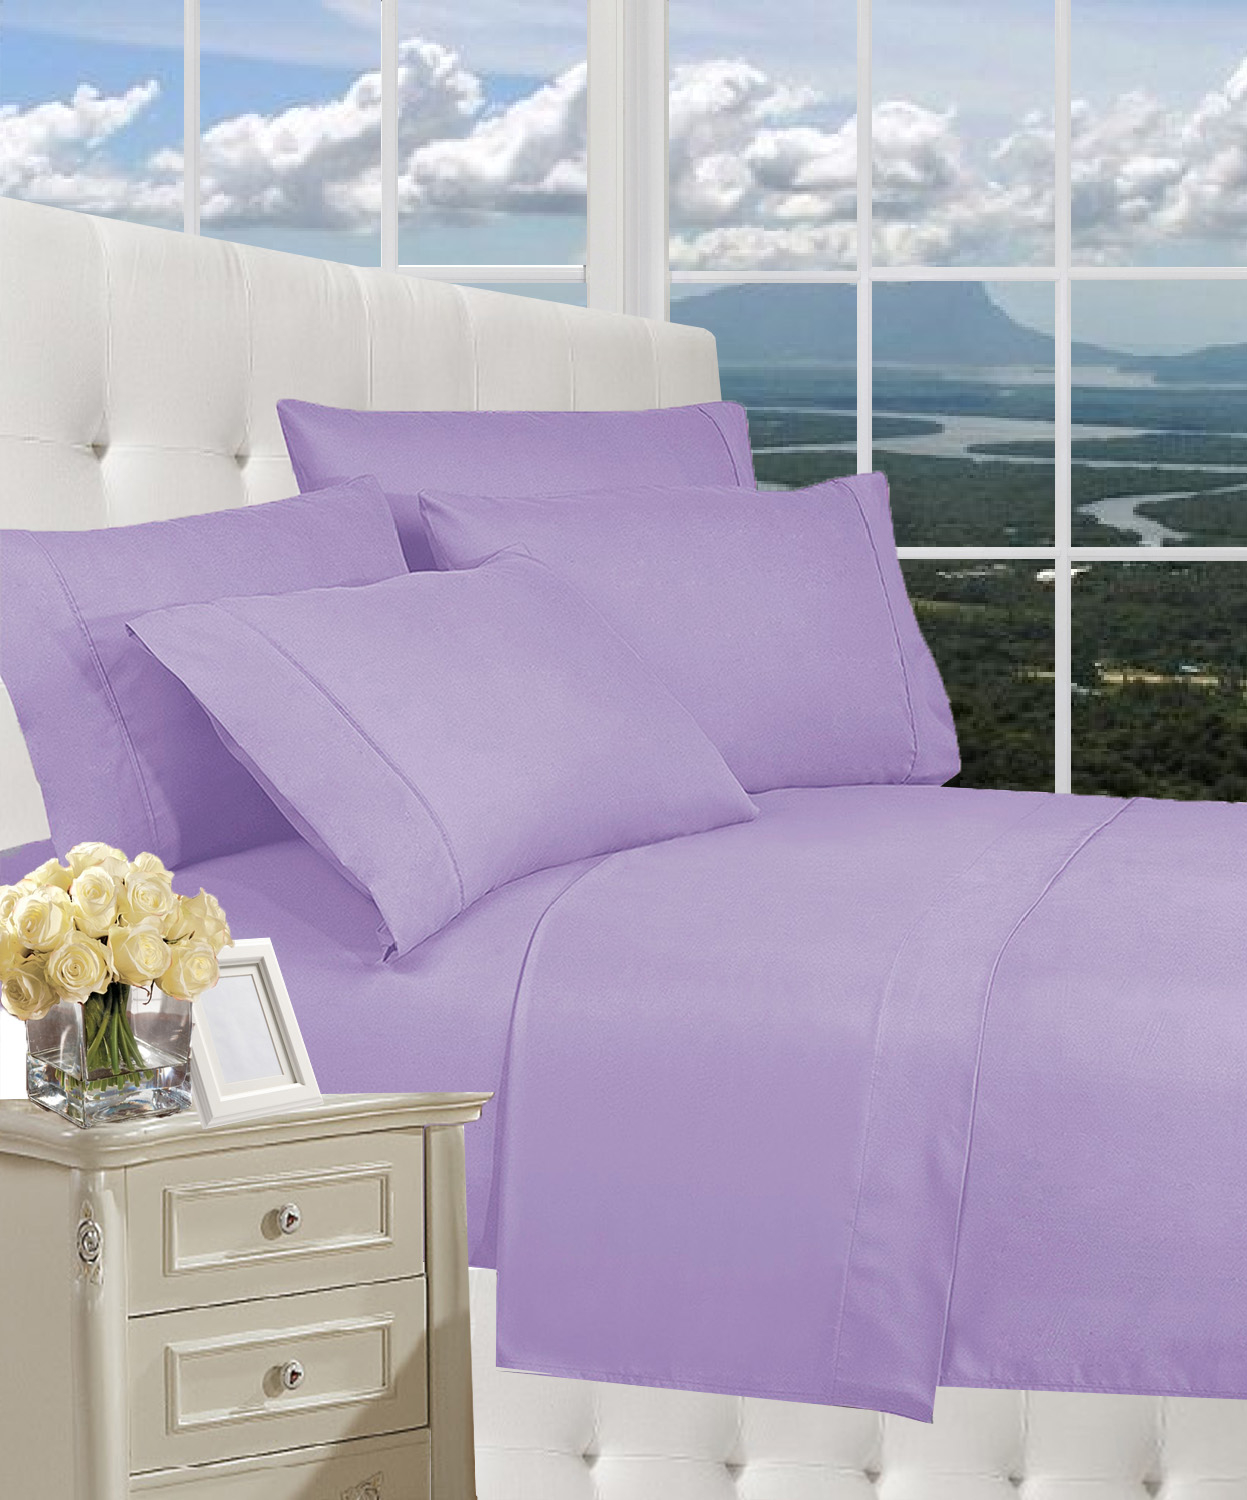 Elegant Comfort 1800 Series Wrinkle Resistant Egyptian Quality Hypoallergenic Ultra Soft Luxury 4-piece Bed Sheet Set, King, Lilac